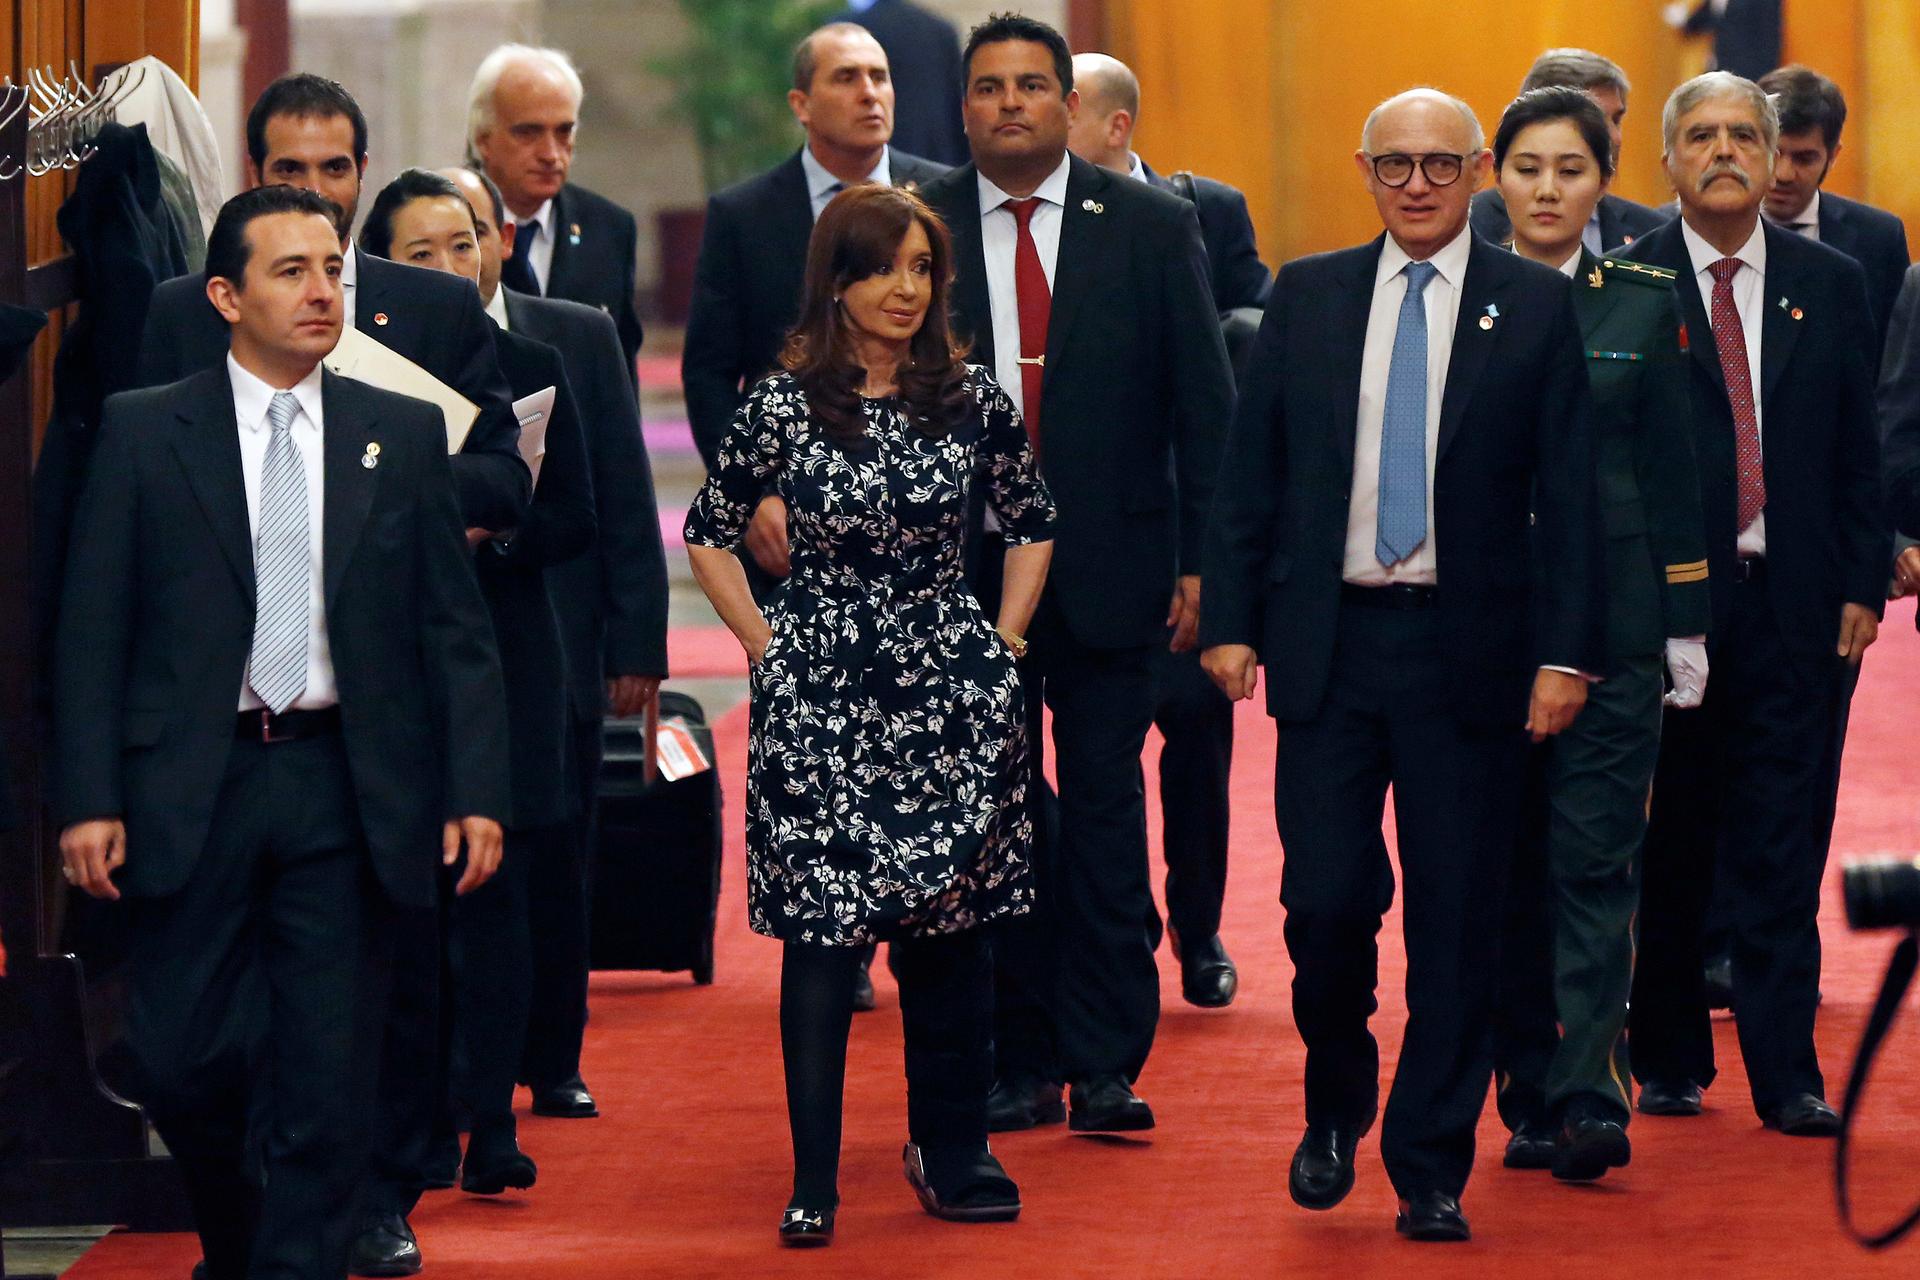 Argentina's President Cristina Fernandez de Kirchner  walks on the carpet before a meeting at the Great Hall of the People in Beijing February 5, 2015.